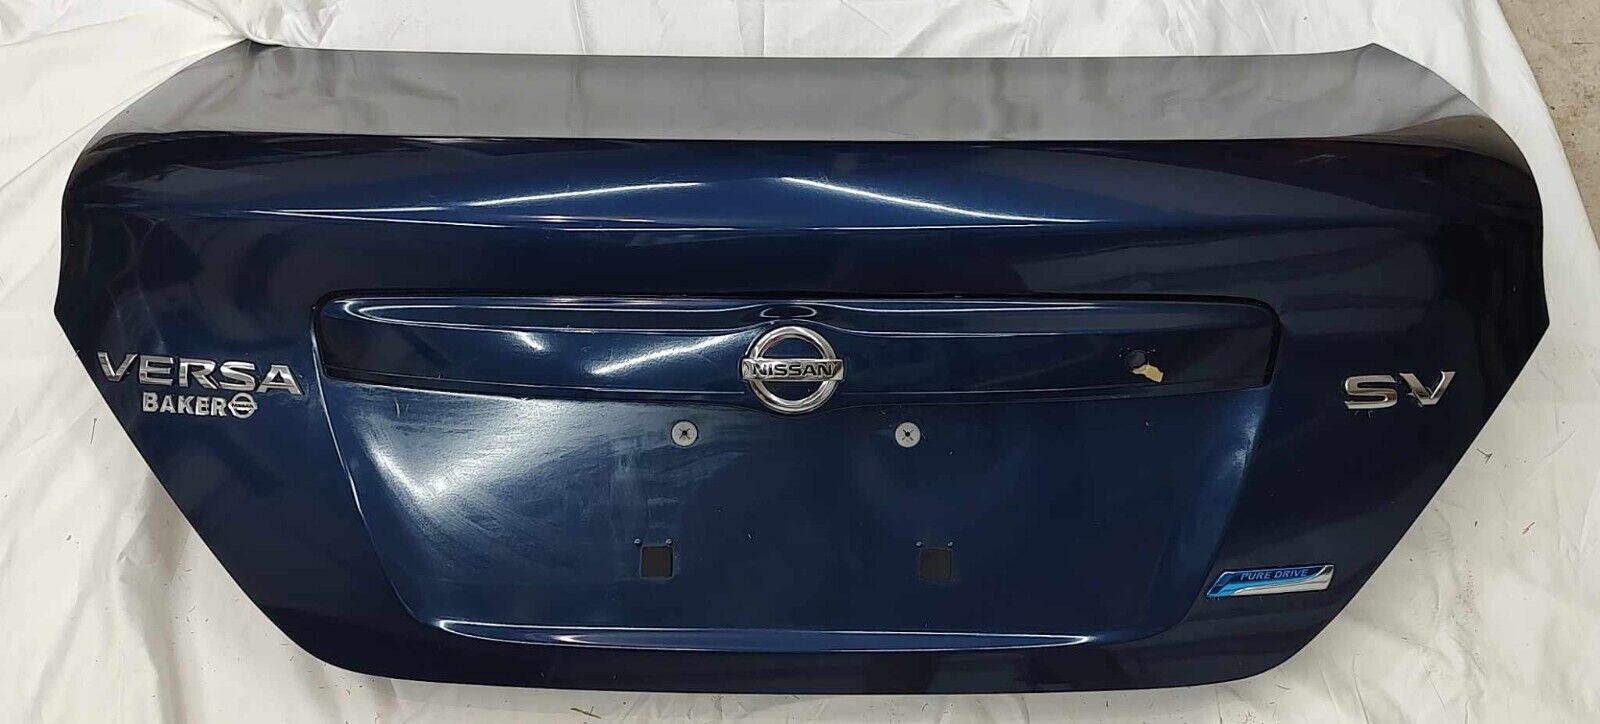 2012-2018. Nissan Versa Trunk Lid. LOCAL PICK UP OR BUYER PAYS SHIPPING